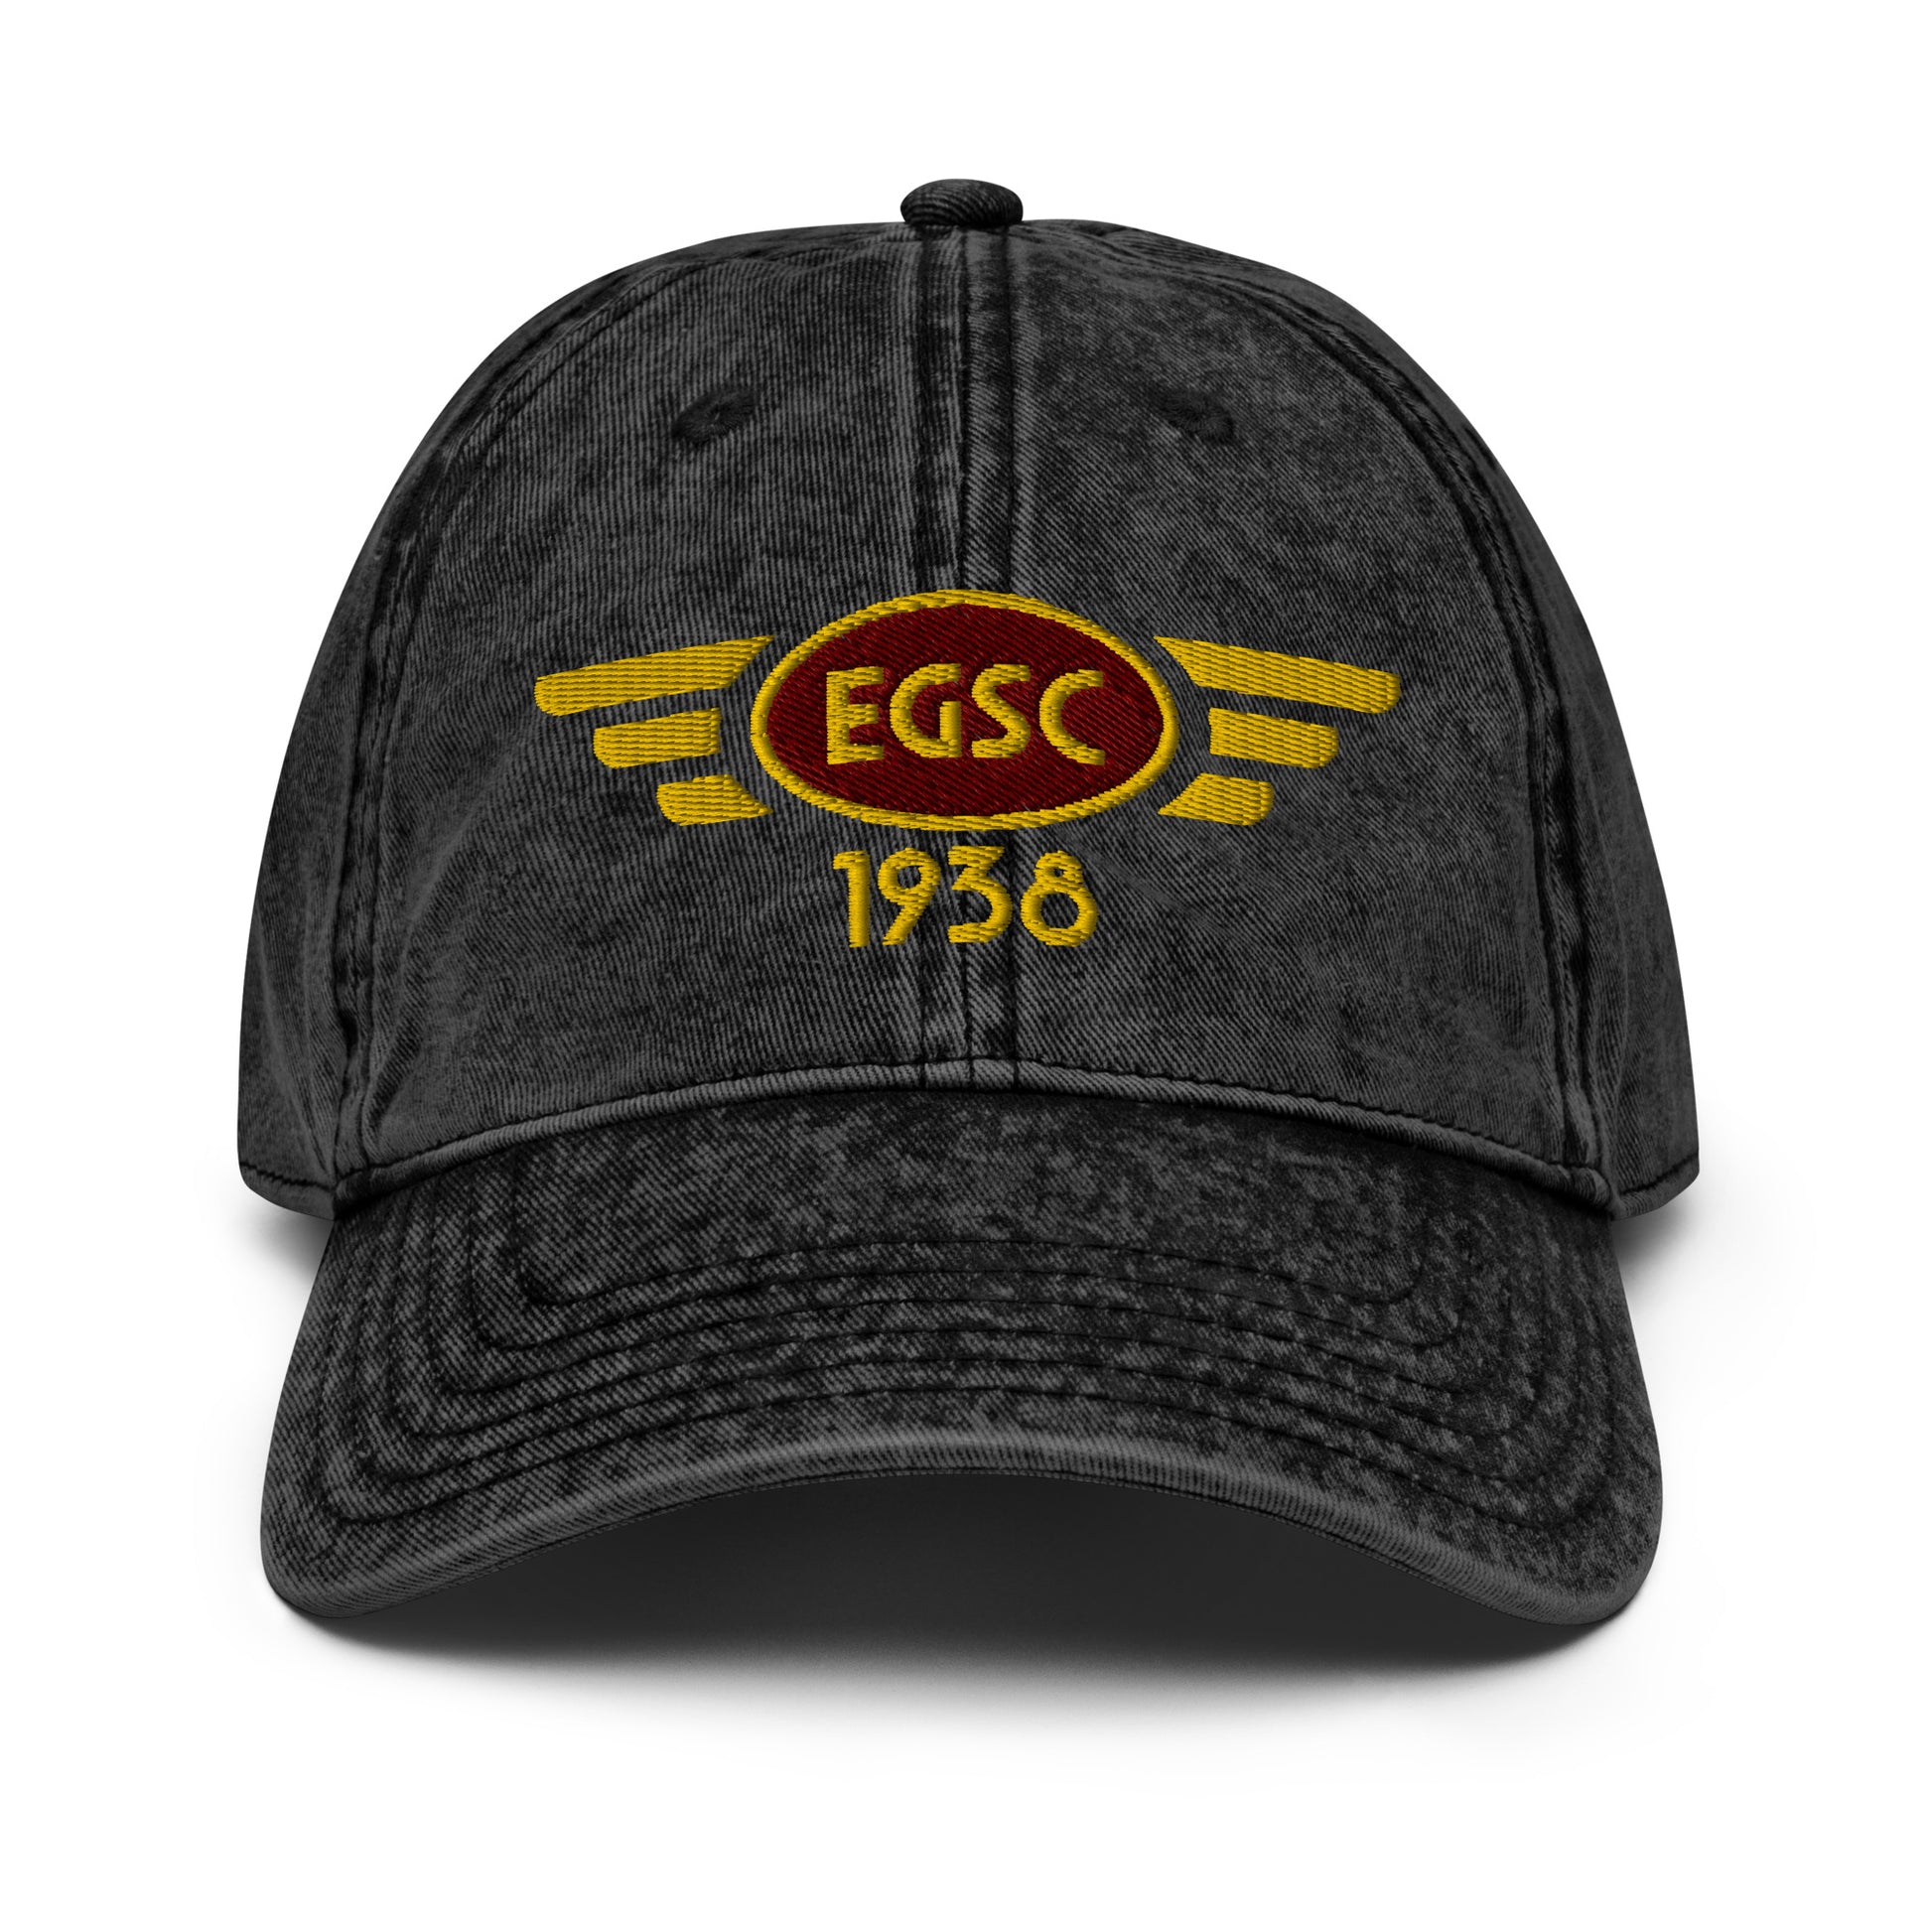 Black cotton twill baseball cap with embroidered vintage style aviation logo for Cambridge Airport.